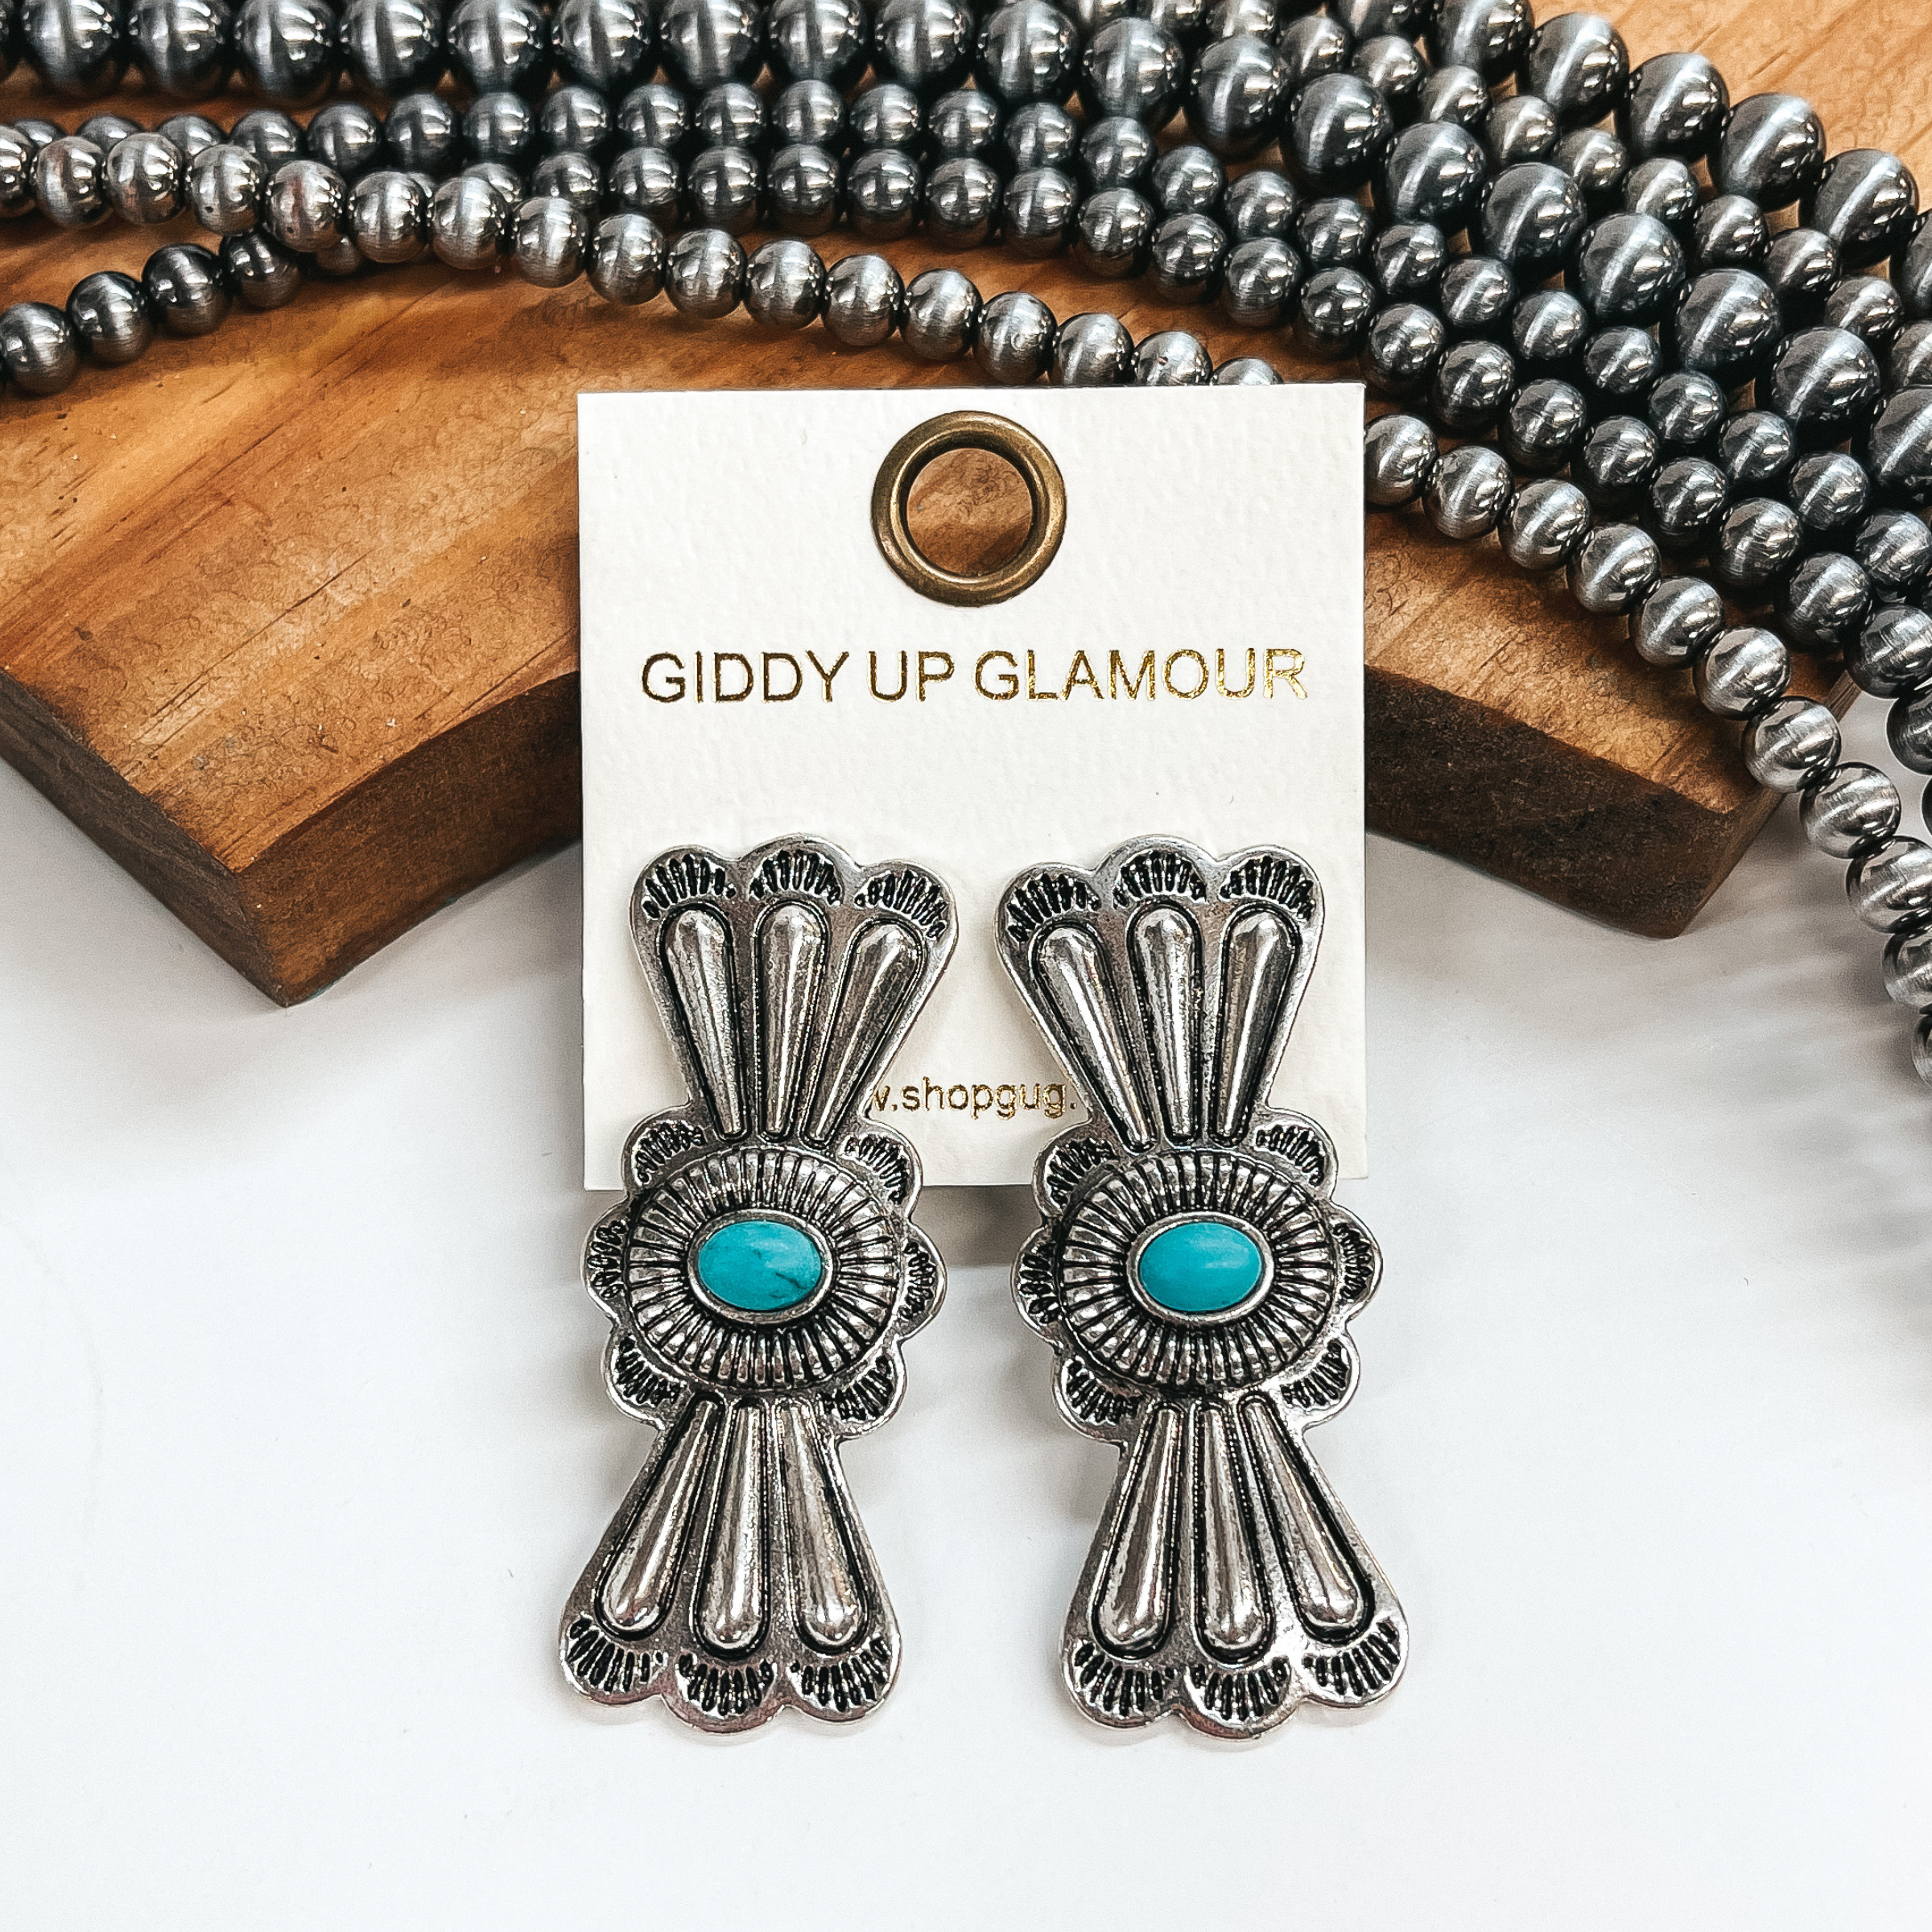 These are hour glass shaped earrings in silver with  a concho pattern. They have a small faux turquoise  stone in the center. These earrings are taken on a  white backround, leaned up against a brown block with  faux navajo pearls in the back as decor.